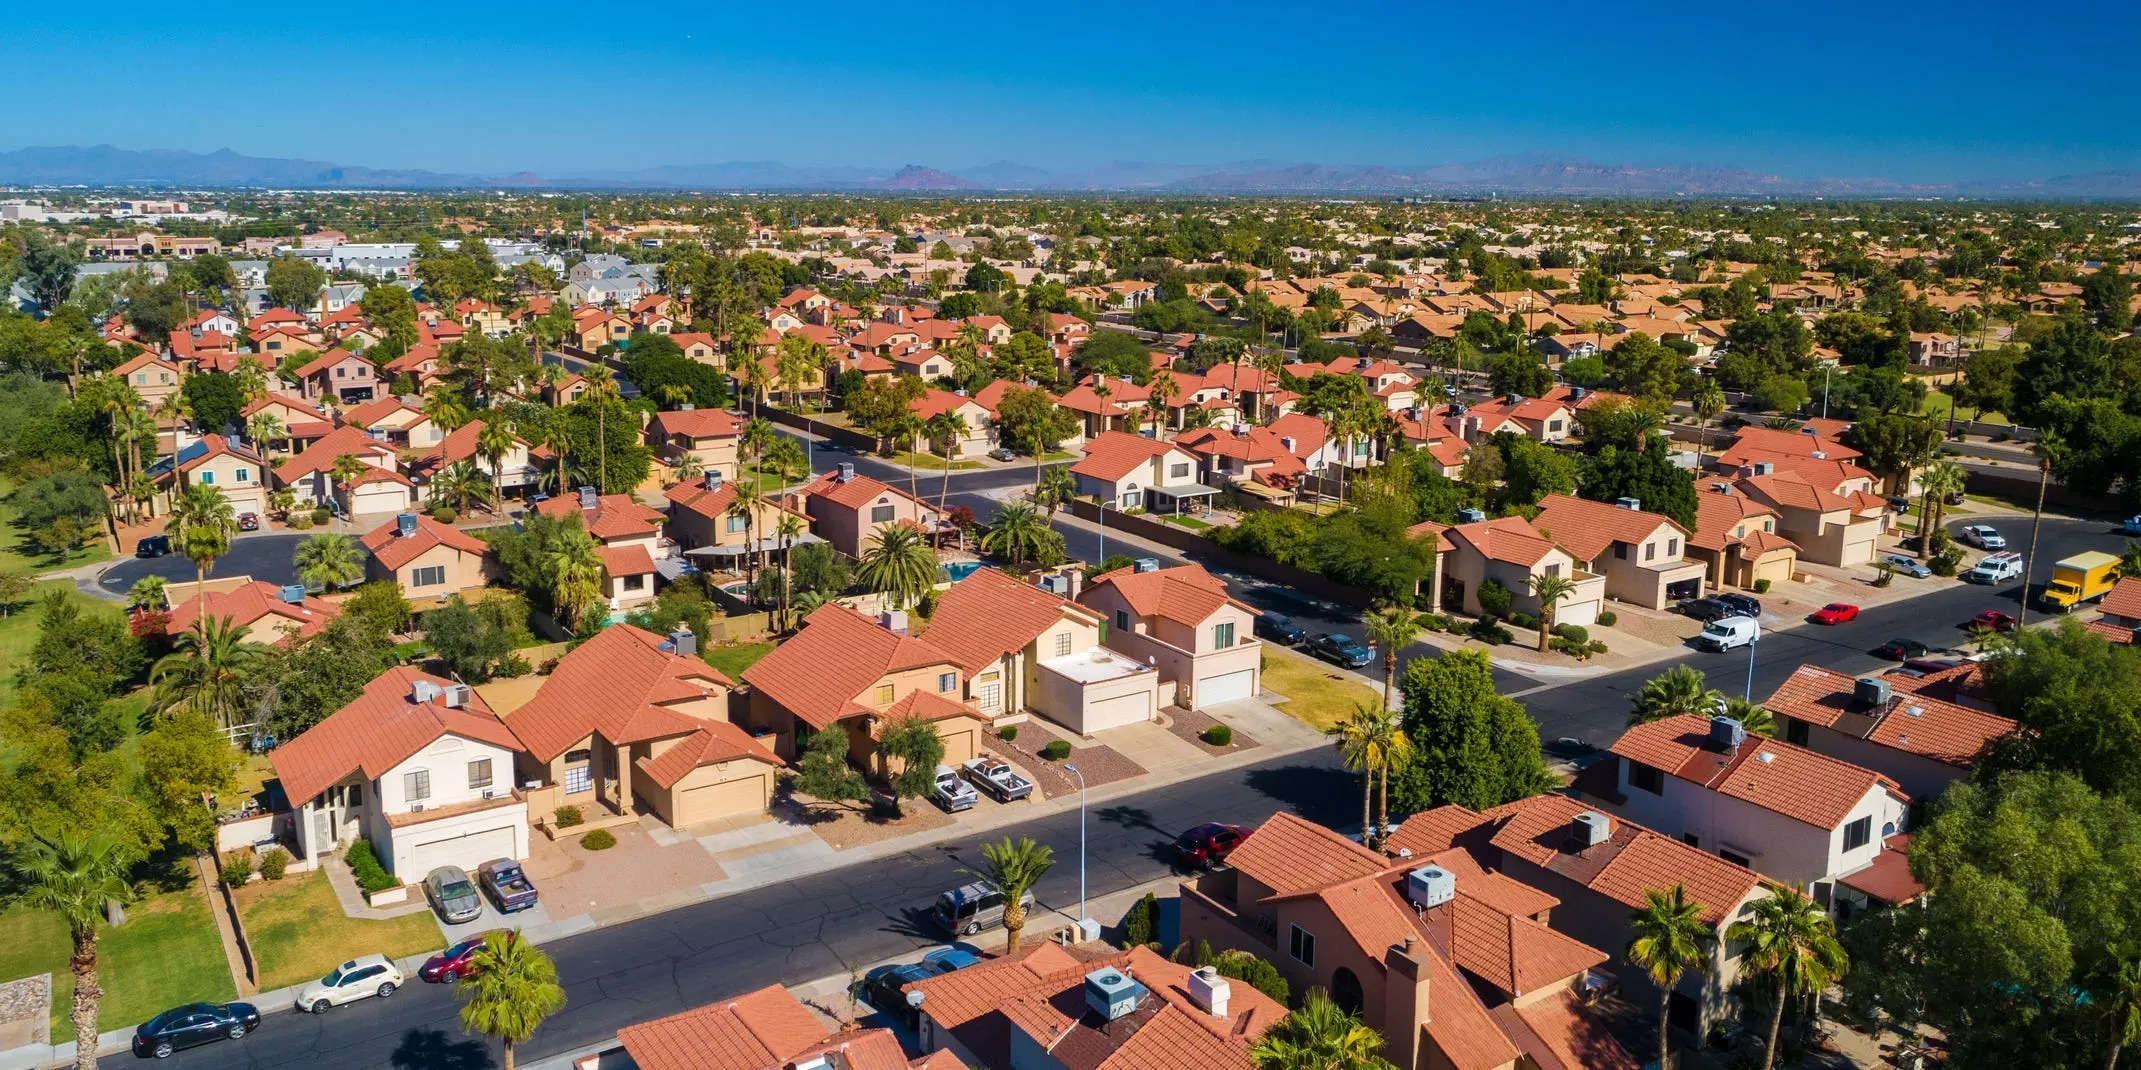 Housing market affordability will improve in 2024 as home prices fall